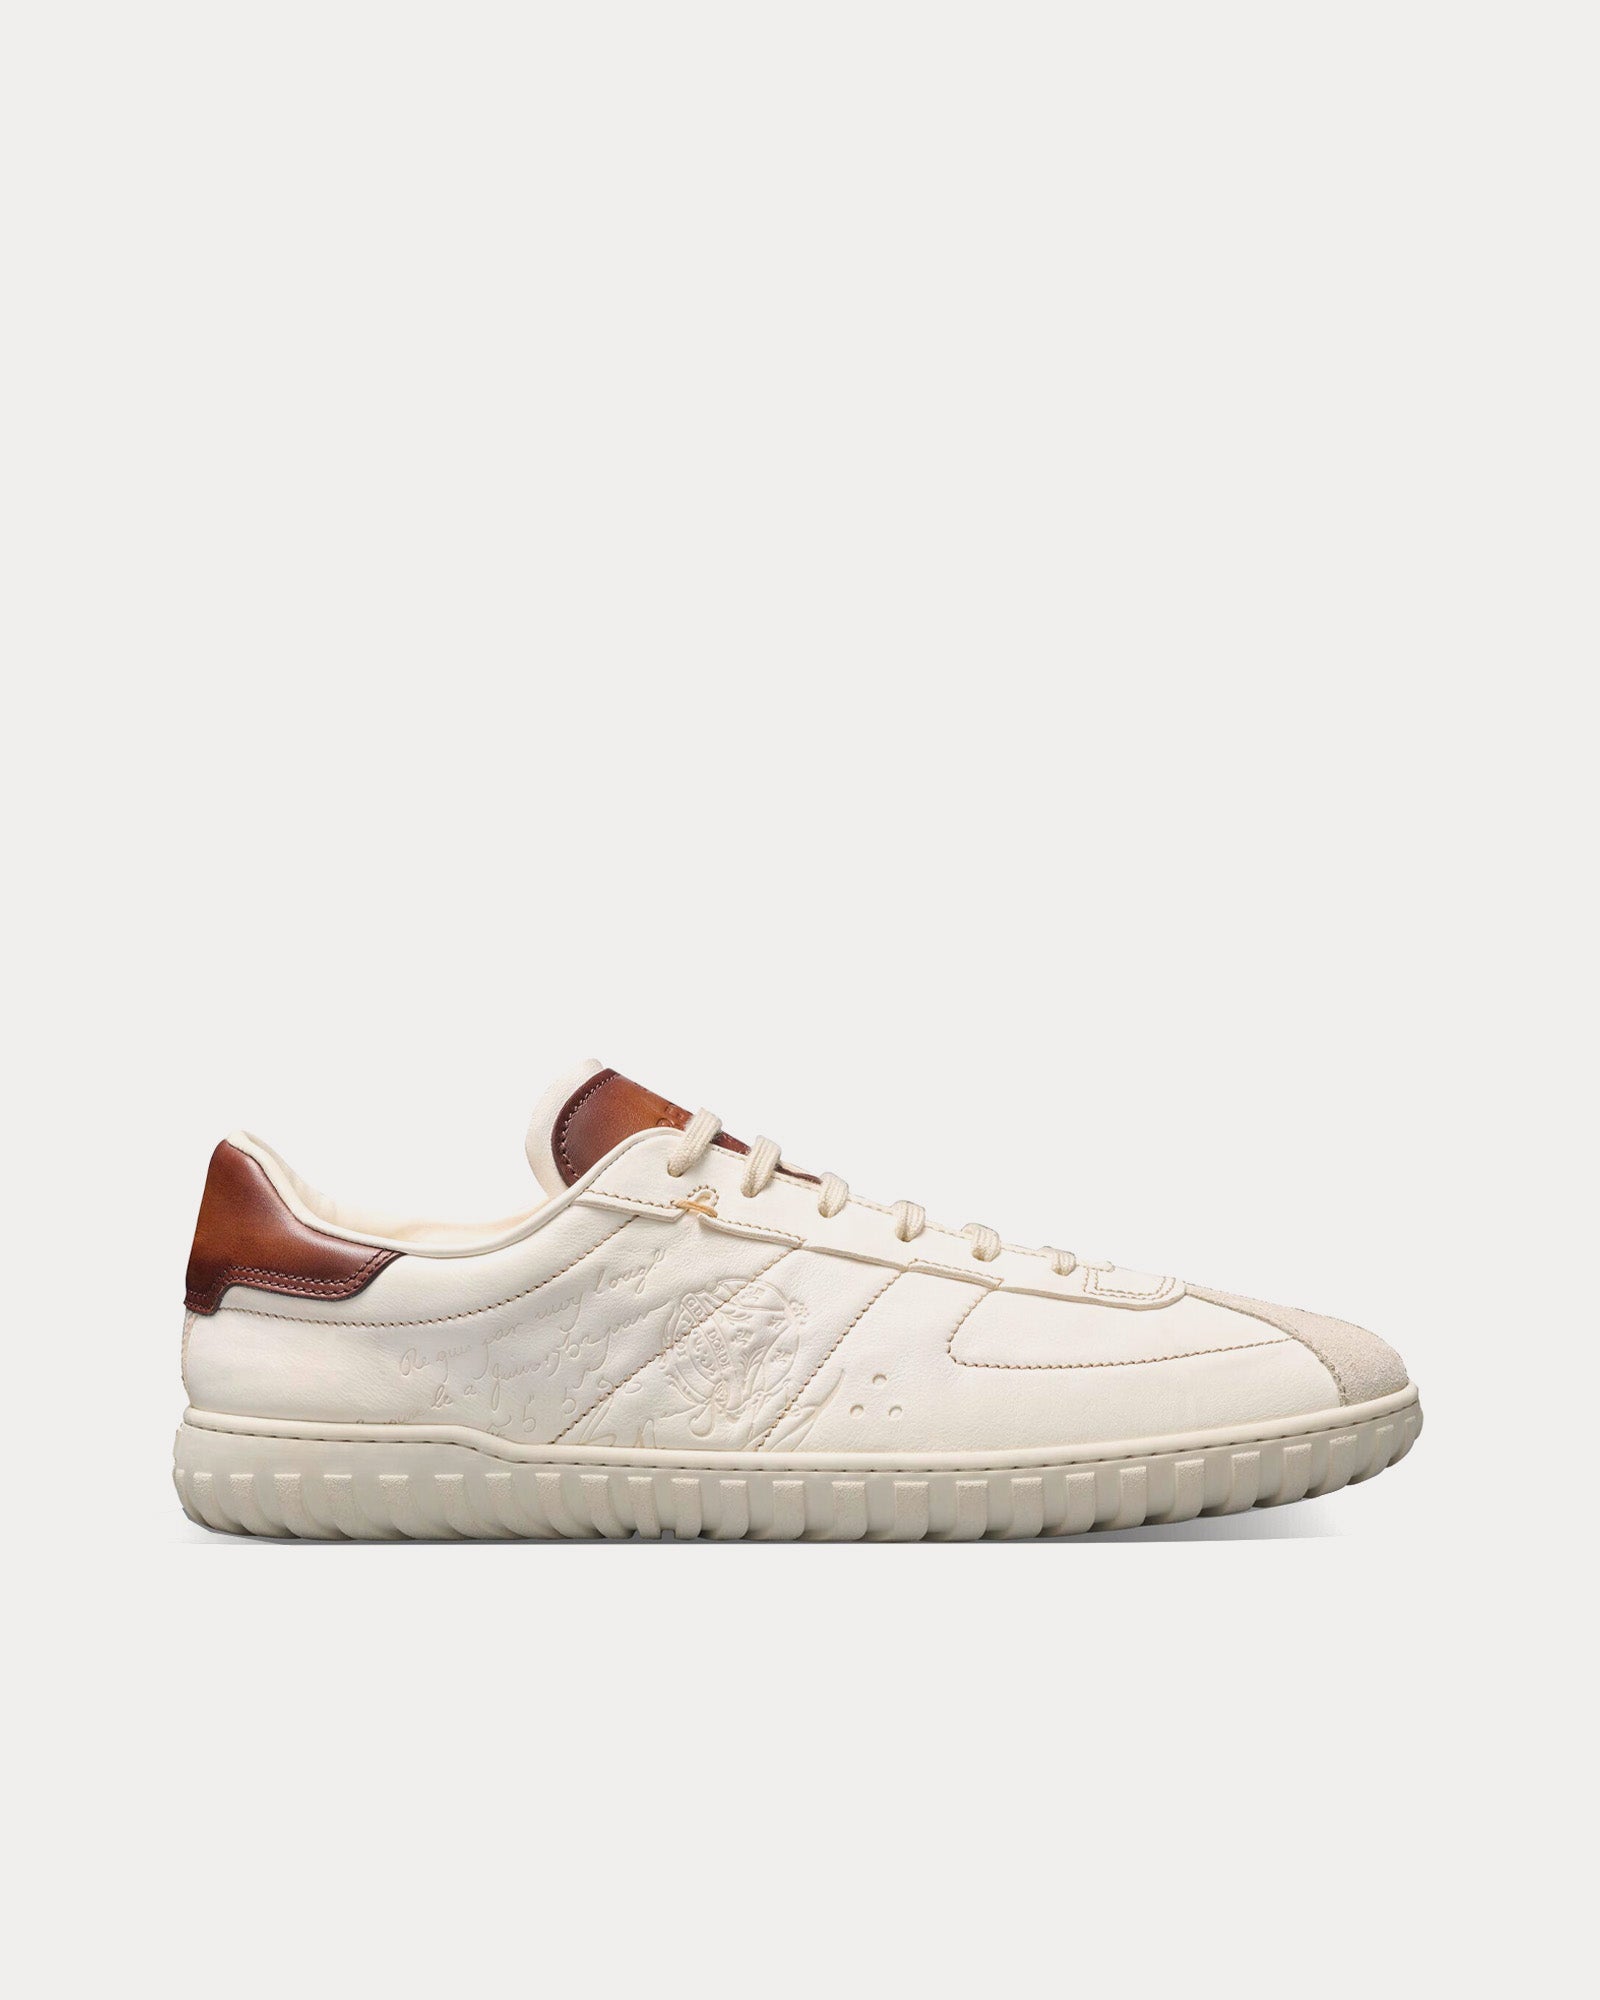 Berluti - Scritto Leather & Suede White Low Top Sneakers